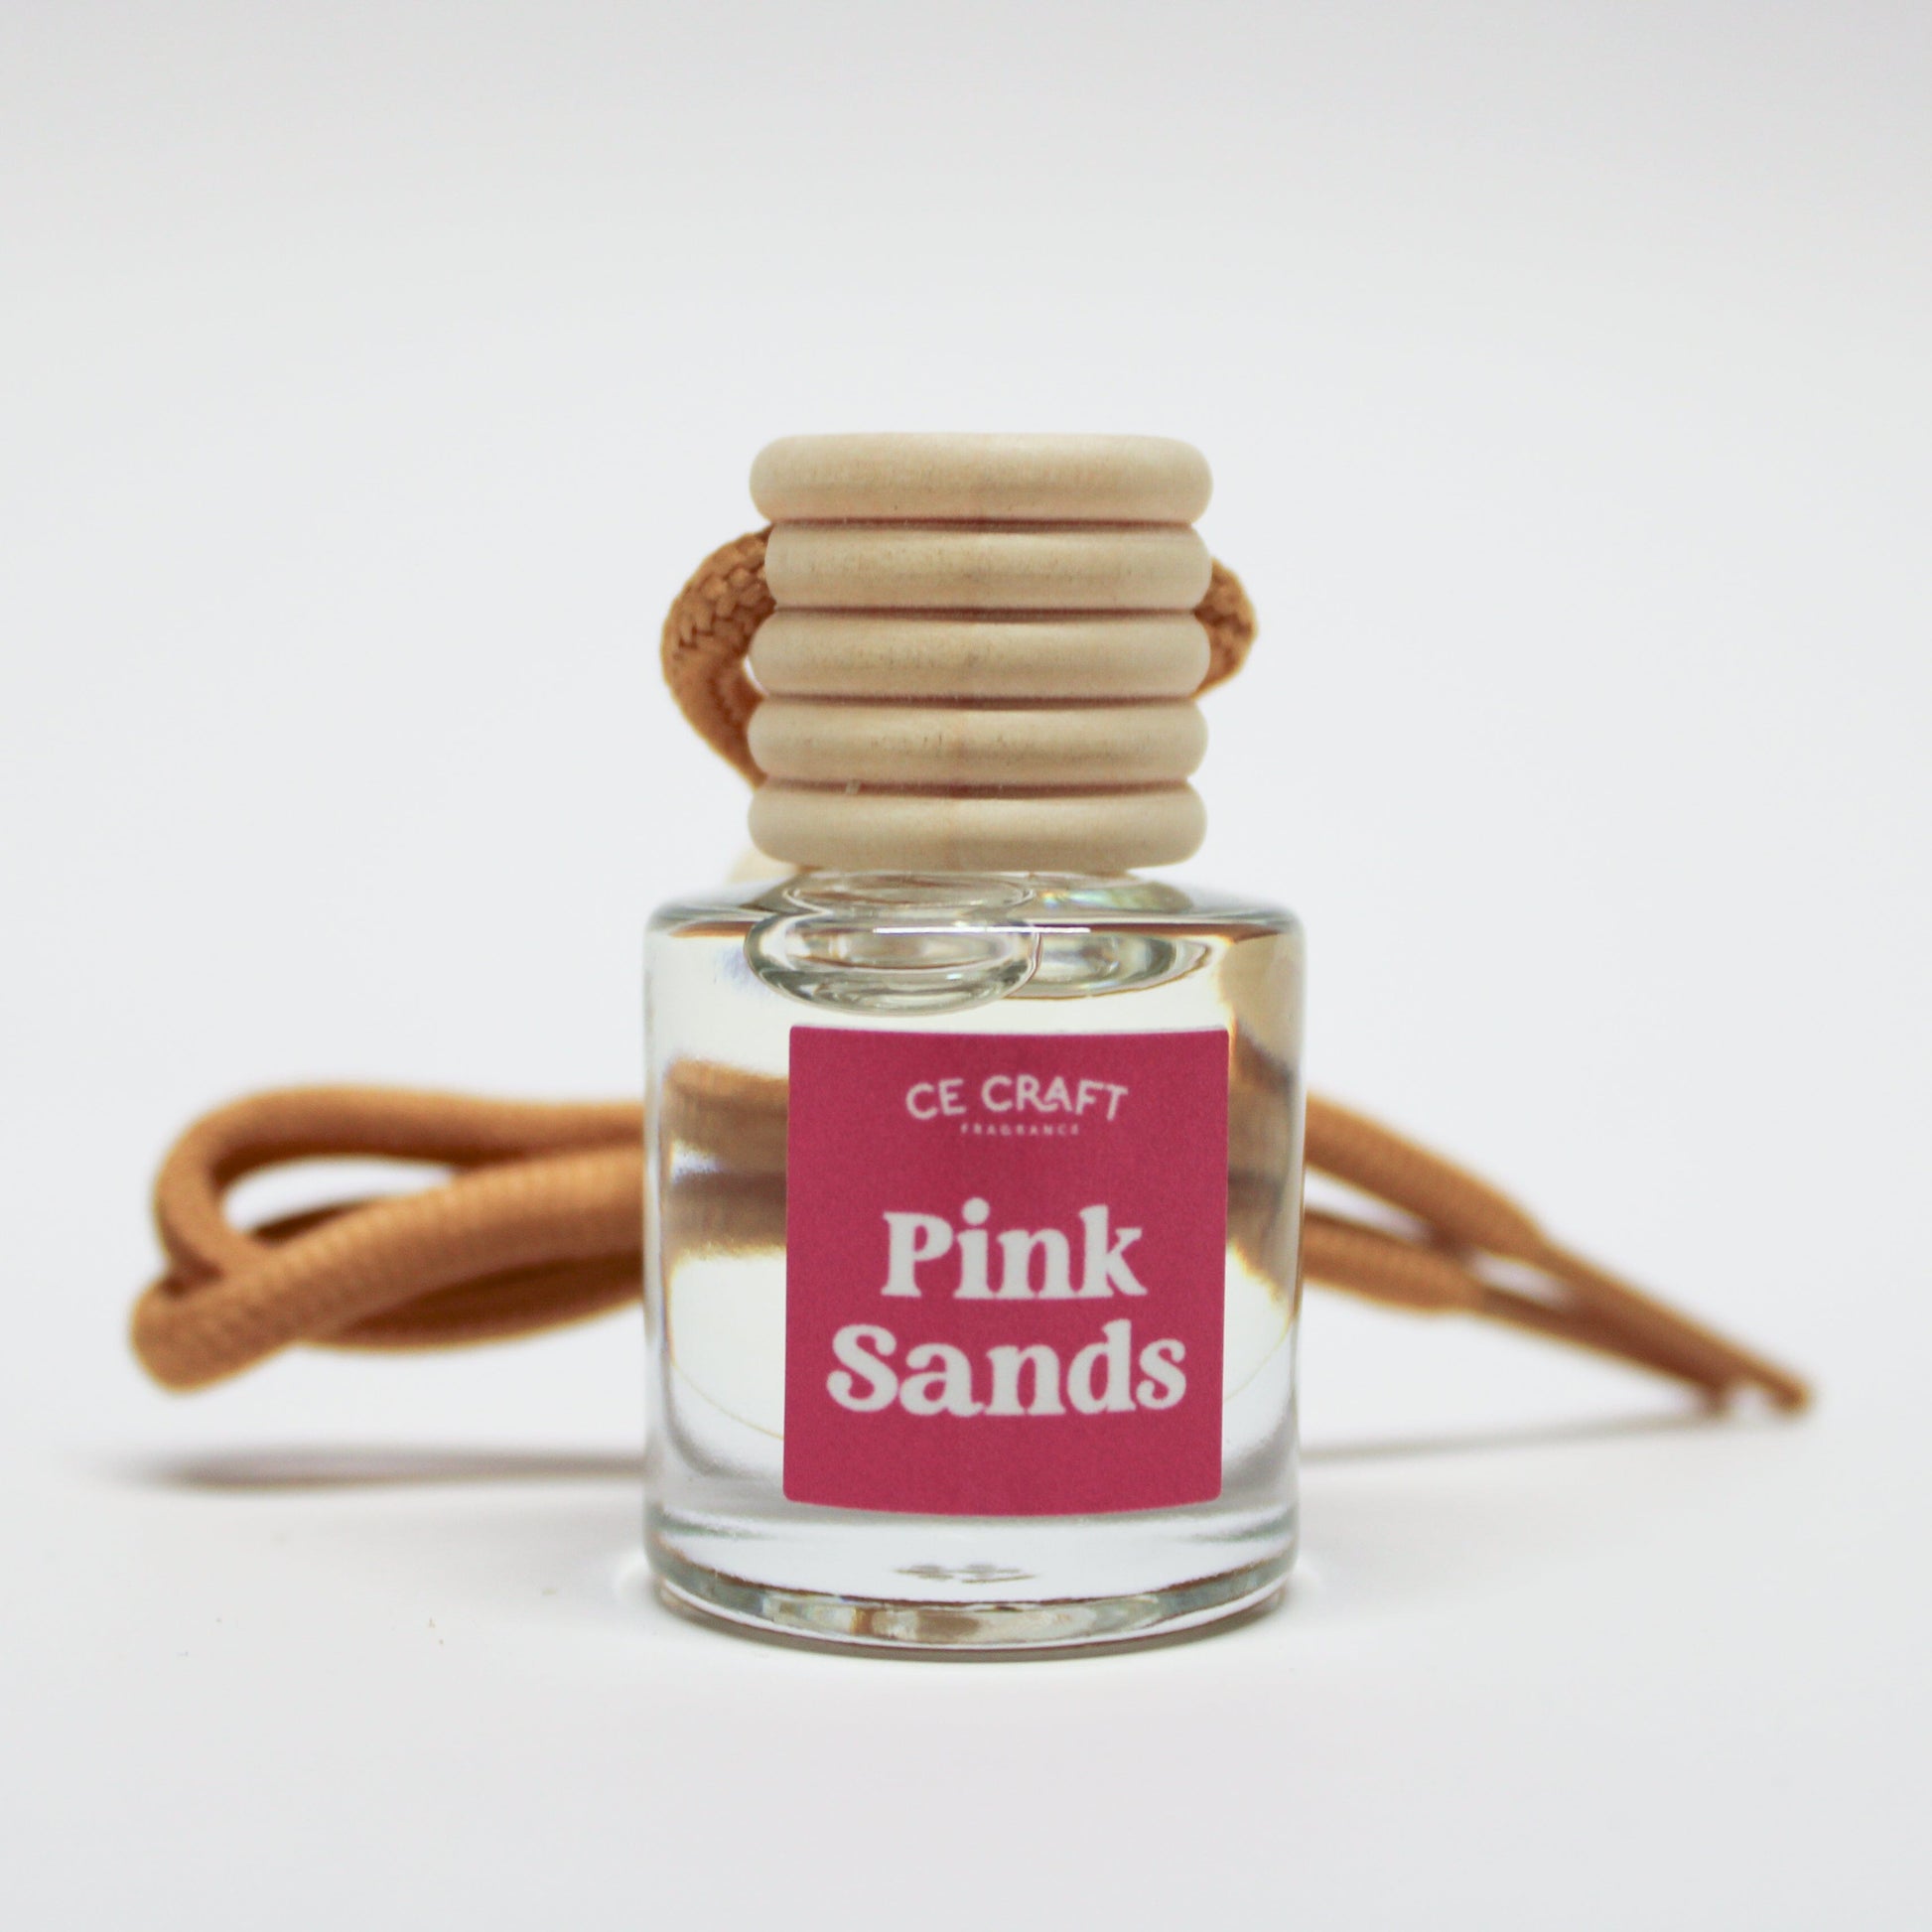 Scented Car Freshener - Car Air Diffuser - Long Lasting Fragrance for Car Vehicle Air Fresheners CE Craft Pink Sands 